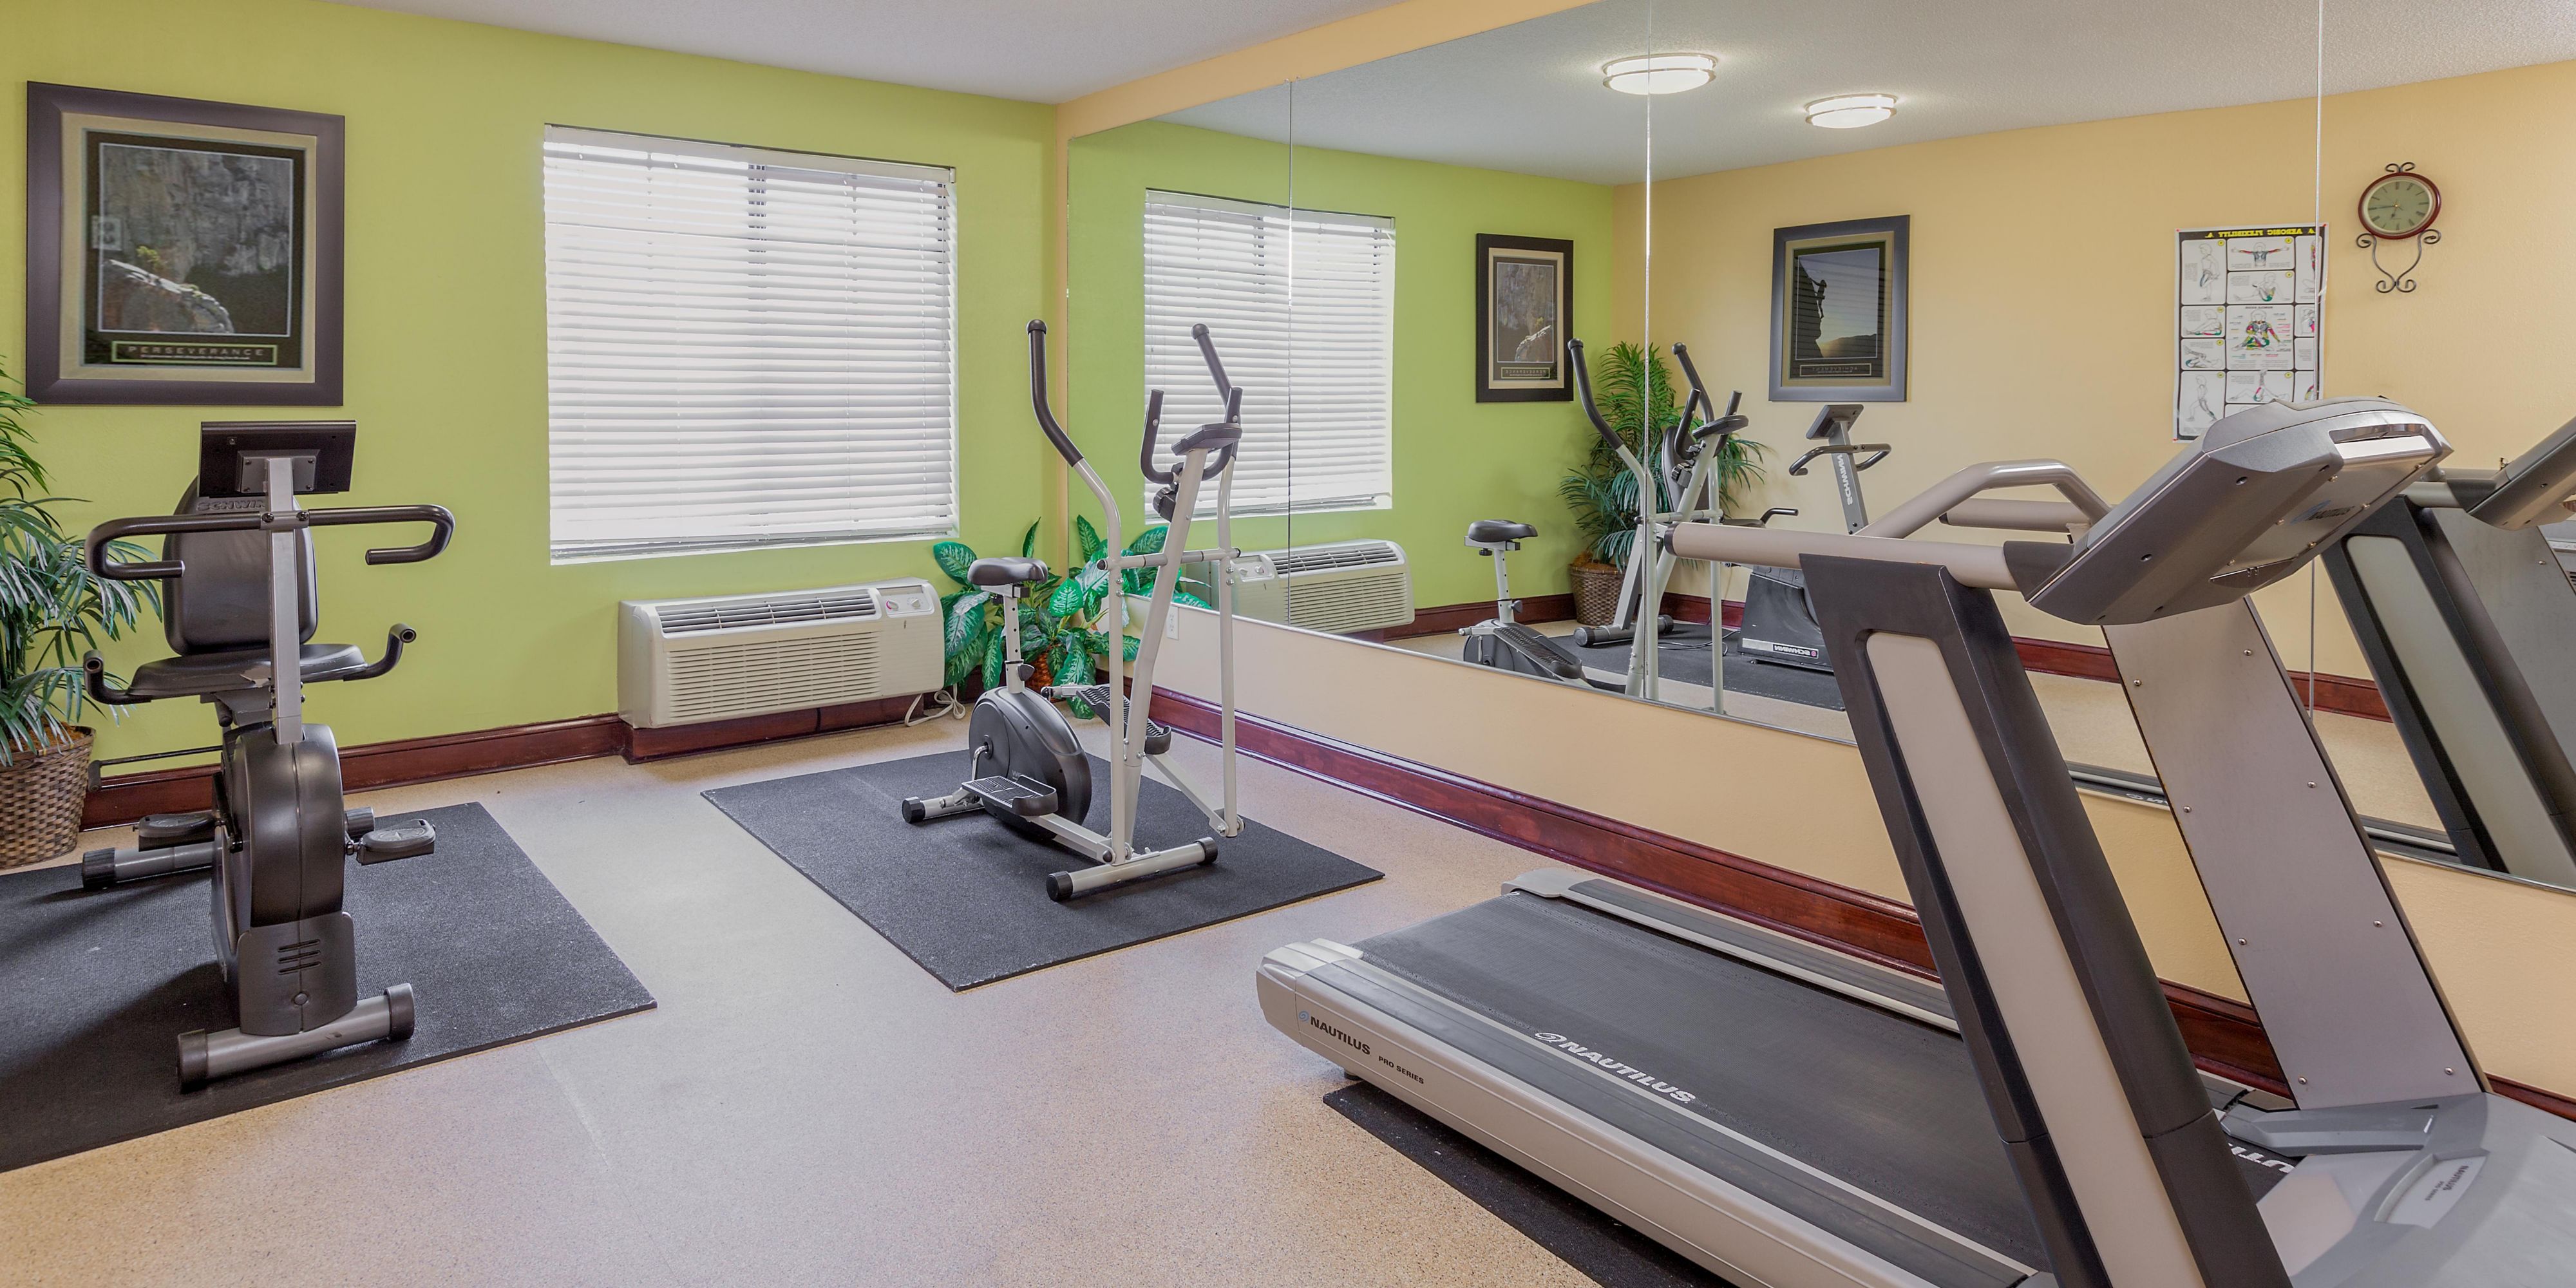 Workout whenever you want! Our fitness center is always open and lots of aerobic and cardio equipment to make it easy to stick to your exercise routine, no sweat!